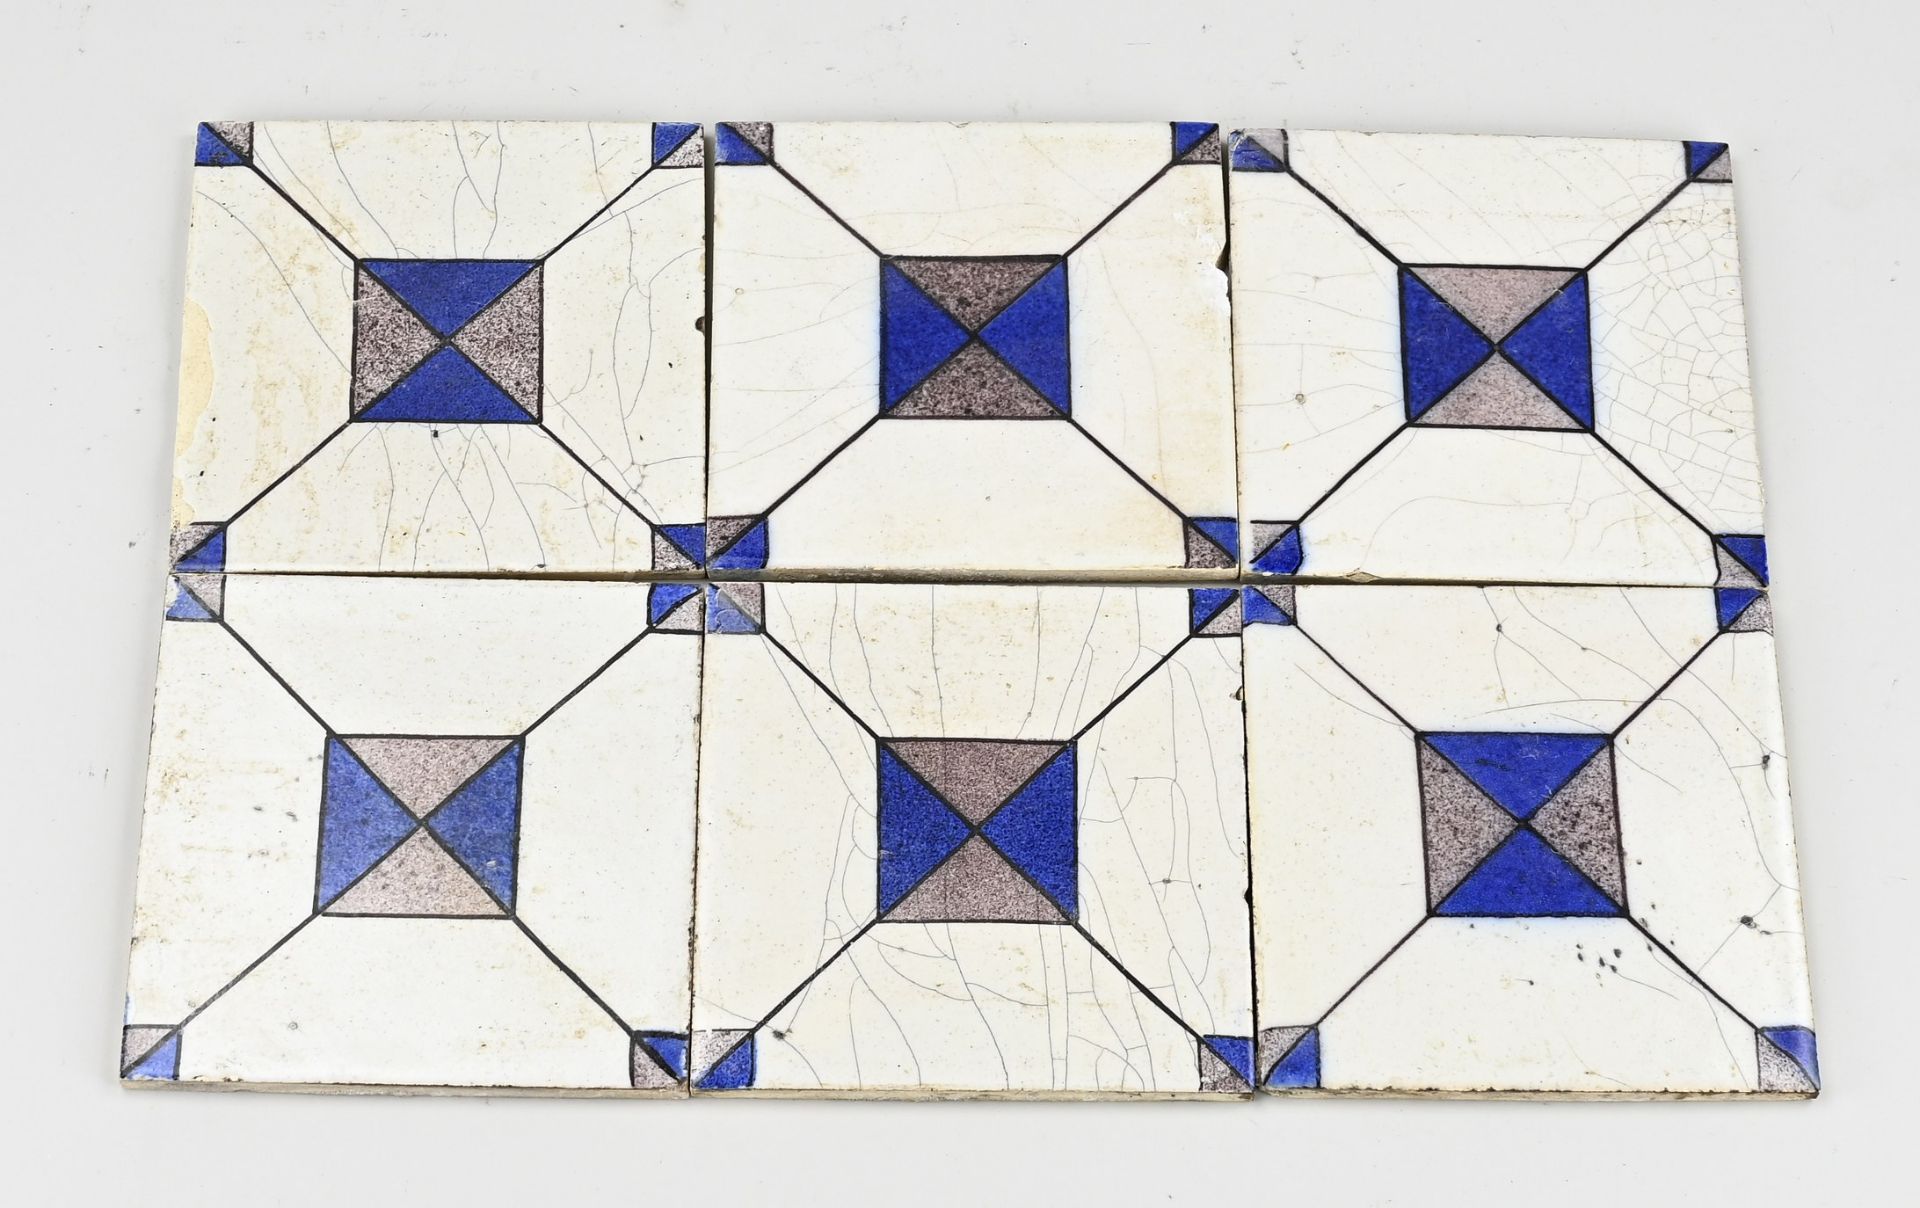 32 Tiles with checkered pattern, 19th century